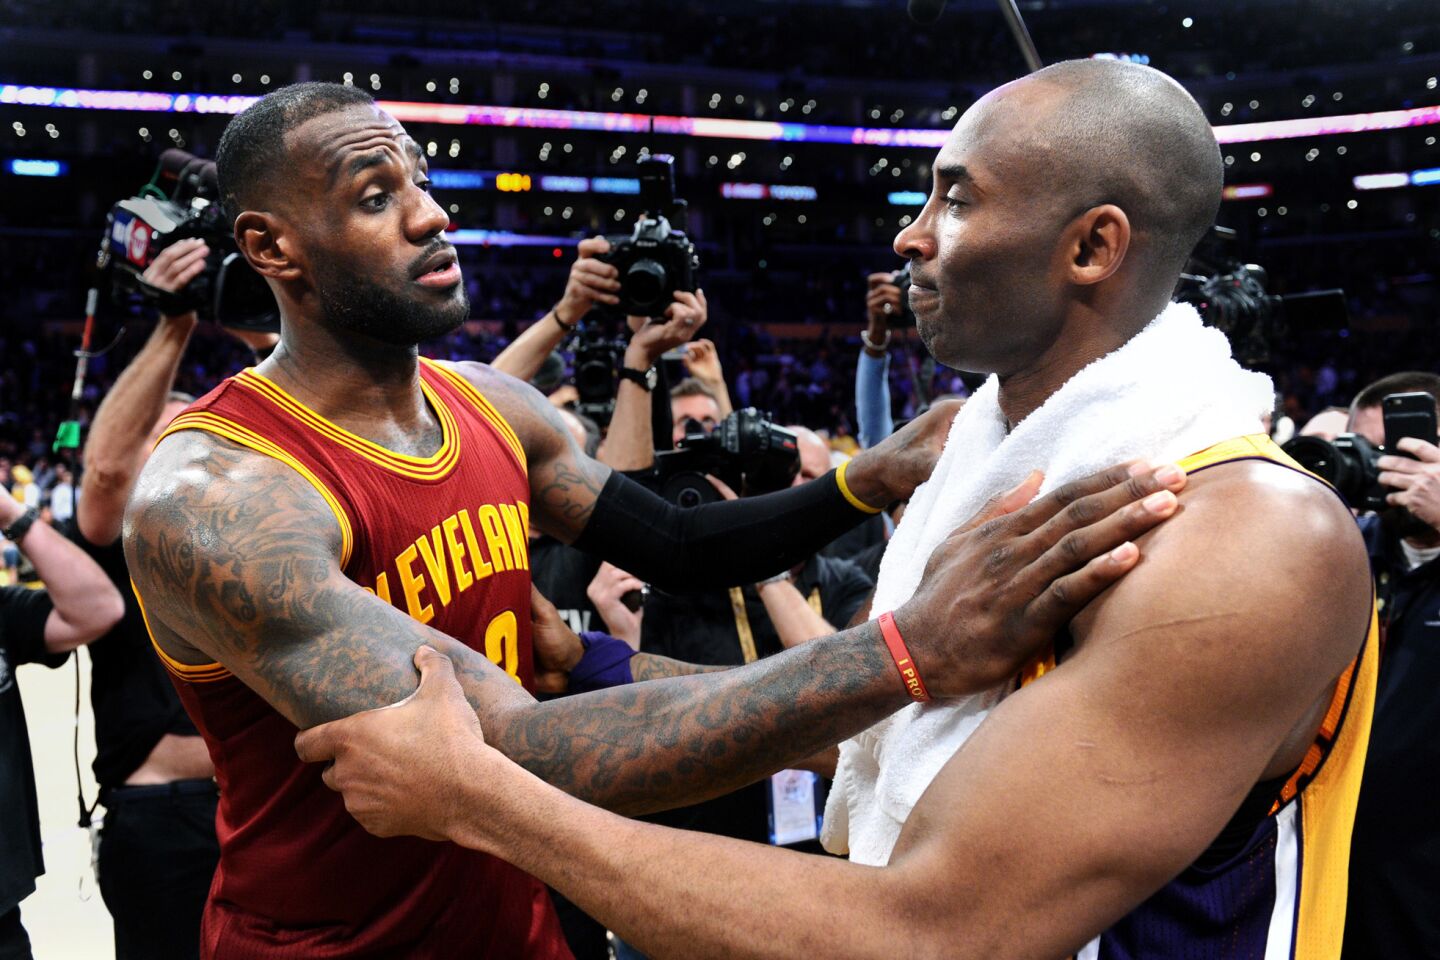 Kobe Bryant and the Cavaliers LeBron James hug after the last time they faced each other on the court at Staples Center, March 10.